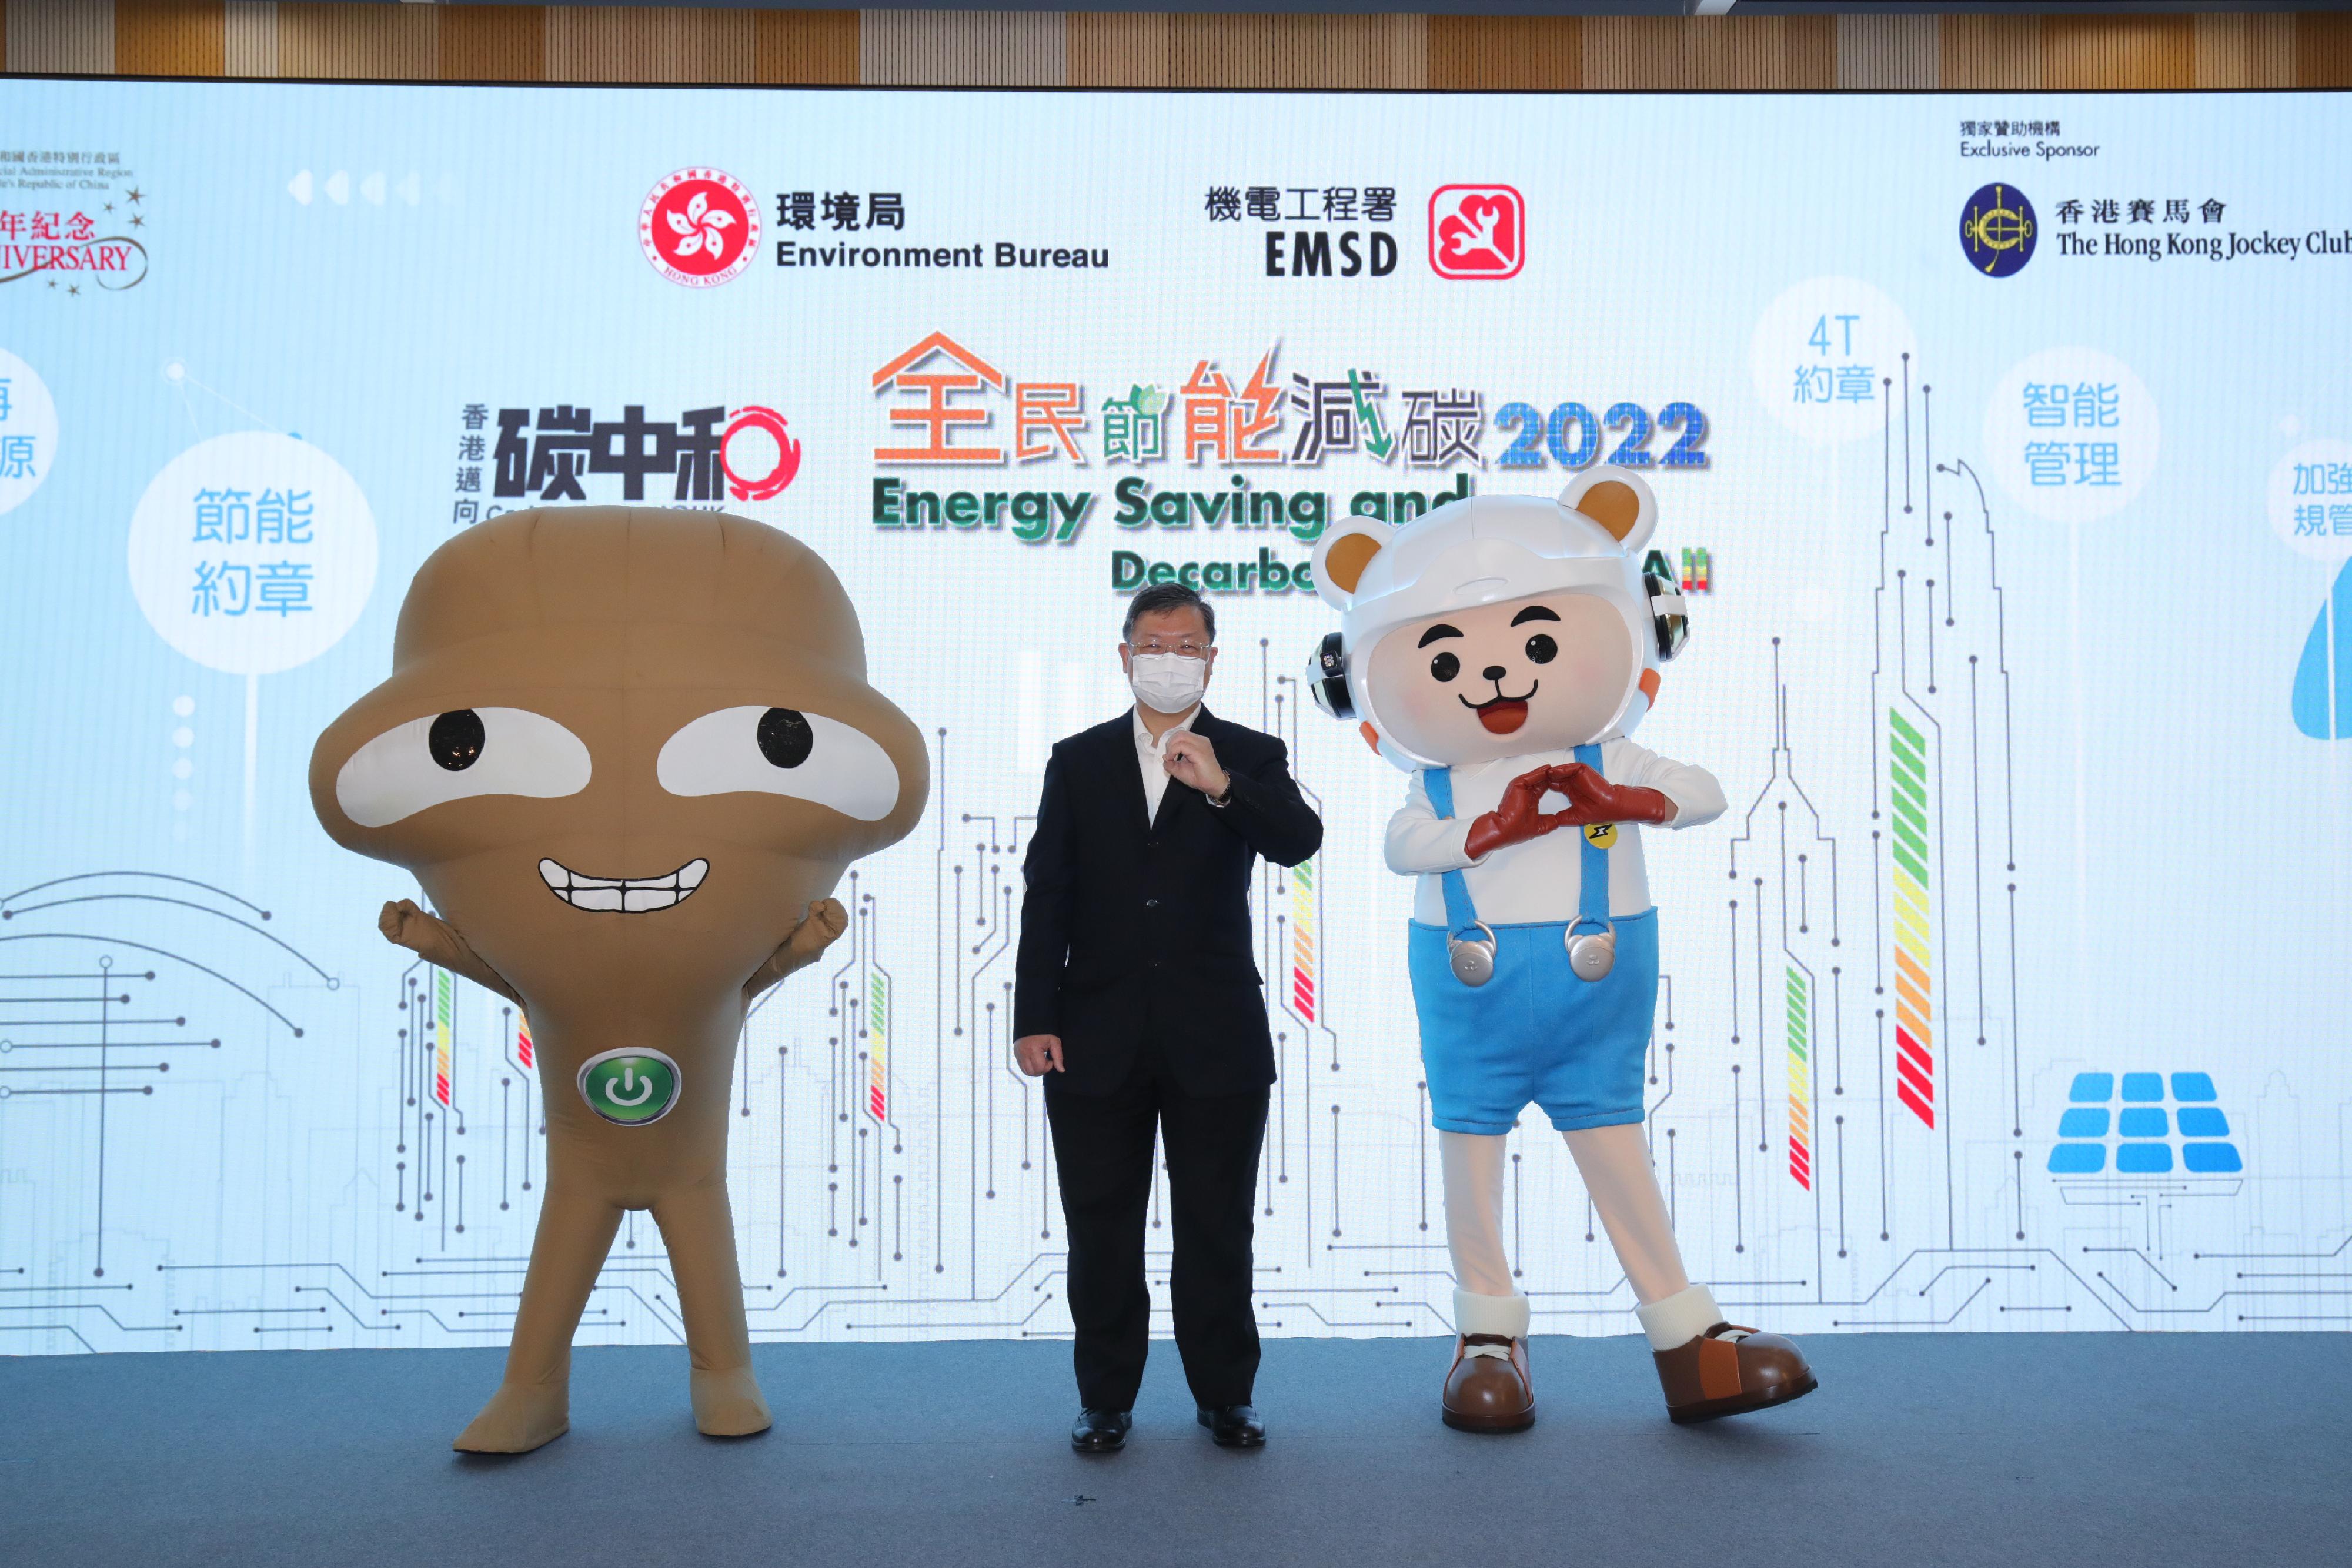 The Environment Bureau and the Electrical and Mechanical Services Department launched the Energy Saving and Decarbonisation for All 2022 Campaign today (June 17) to encourage the community to achieve low-carbon transformation by saving energy and decarbonising. The Campaign's launch ceremony is one of the celebration activities for the 25th anniversary of the establishment of the Hong Kong Special Administrative Region. Picture shows the Director of Electrical and Mechanical Services, Mr Pang Yiu-hung, kicking off the campaign.